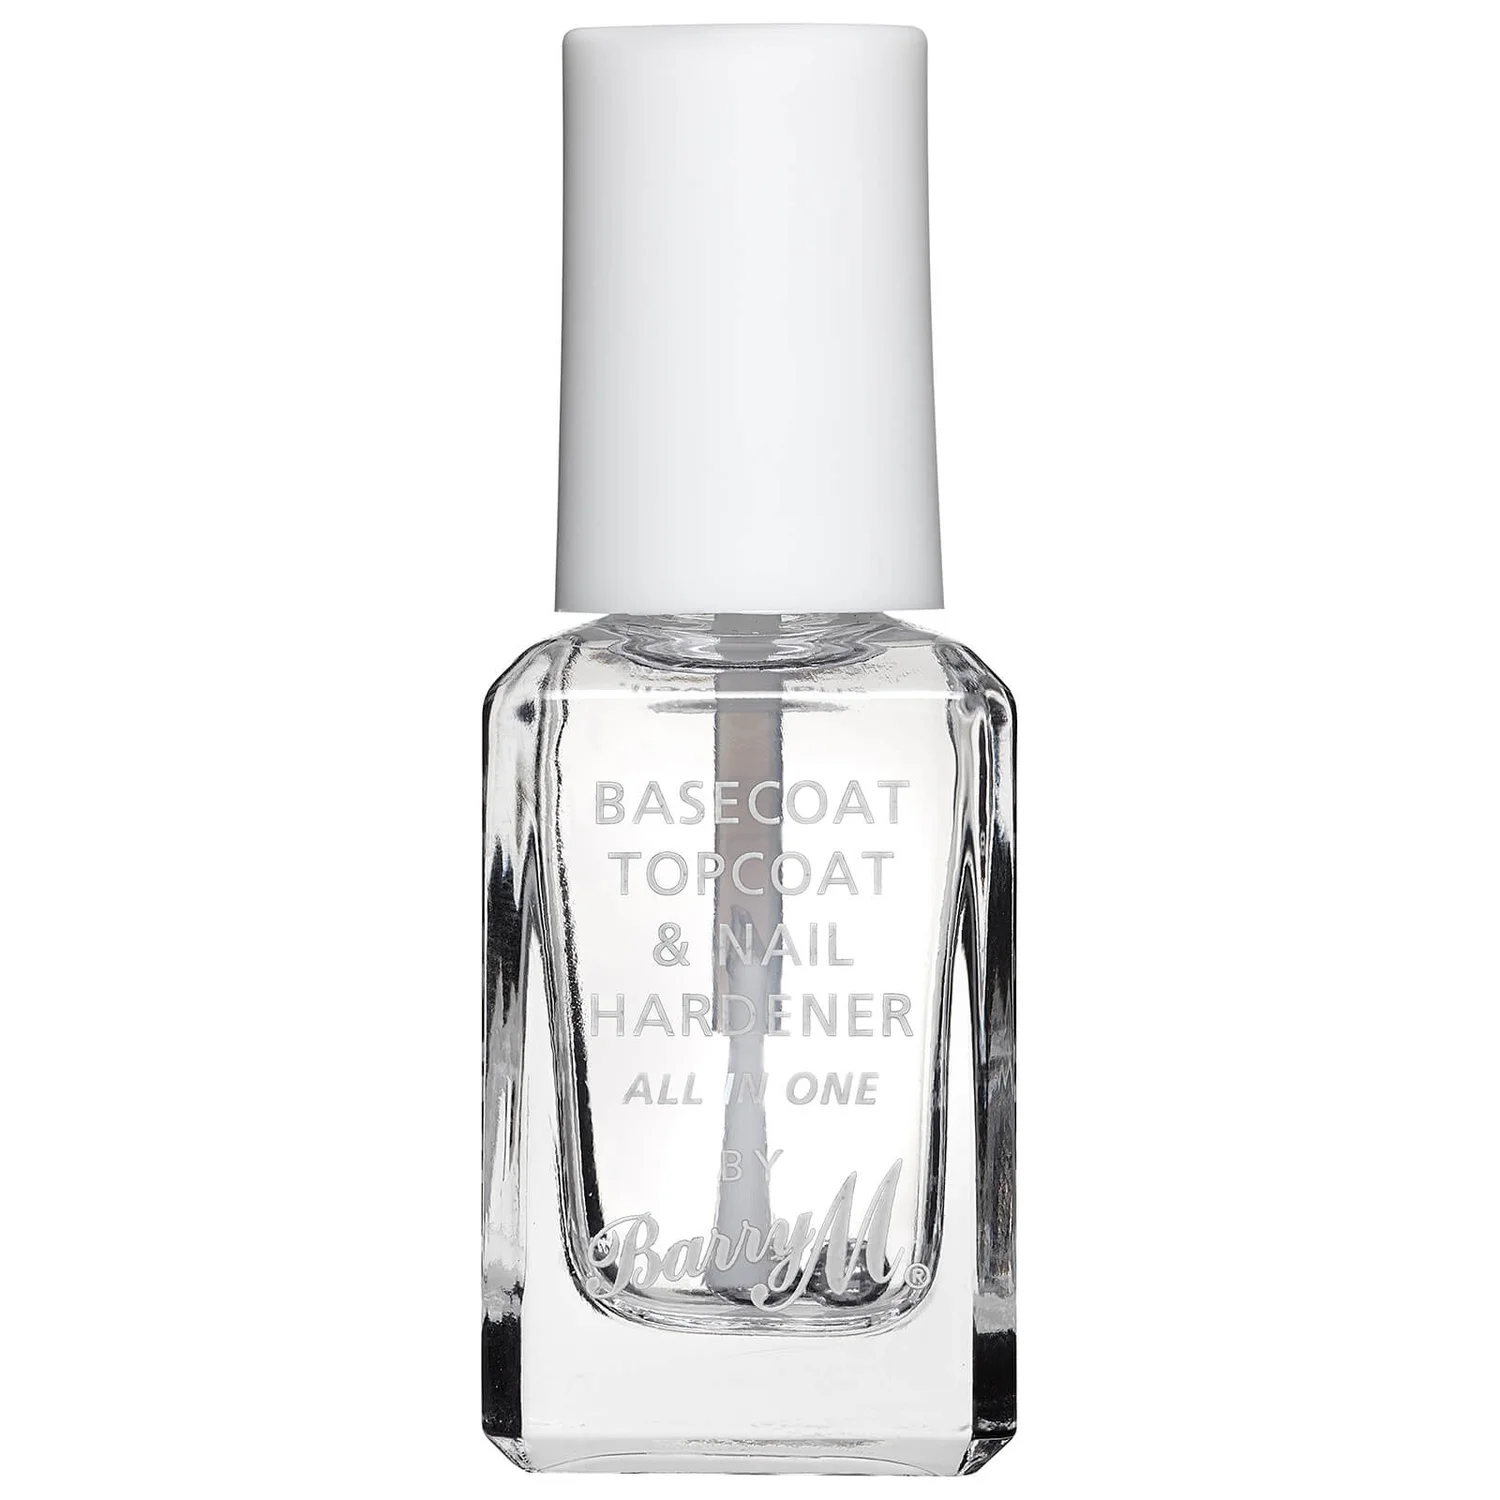 Barry M Cosmetics All in One Nail Paint
